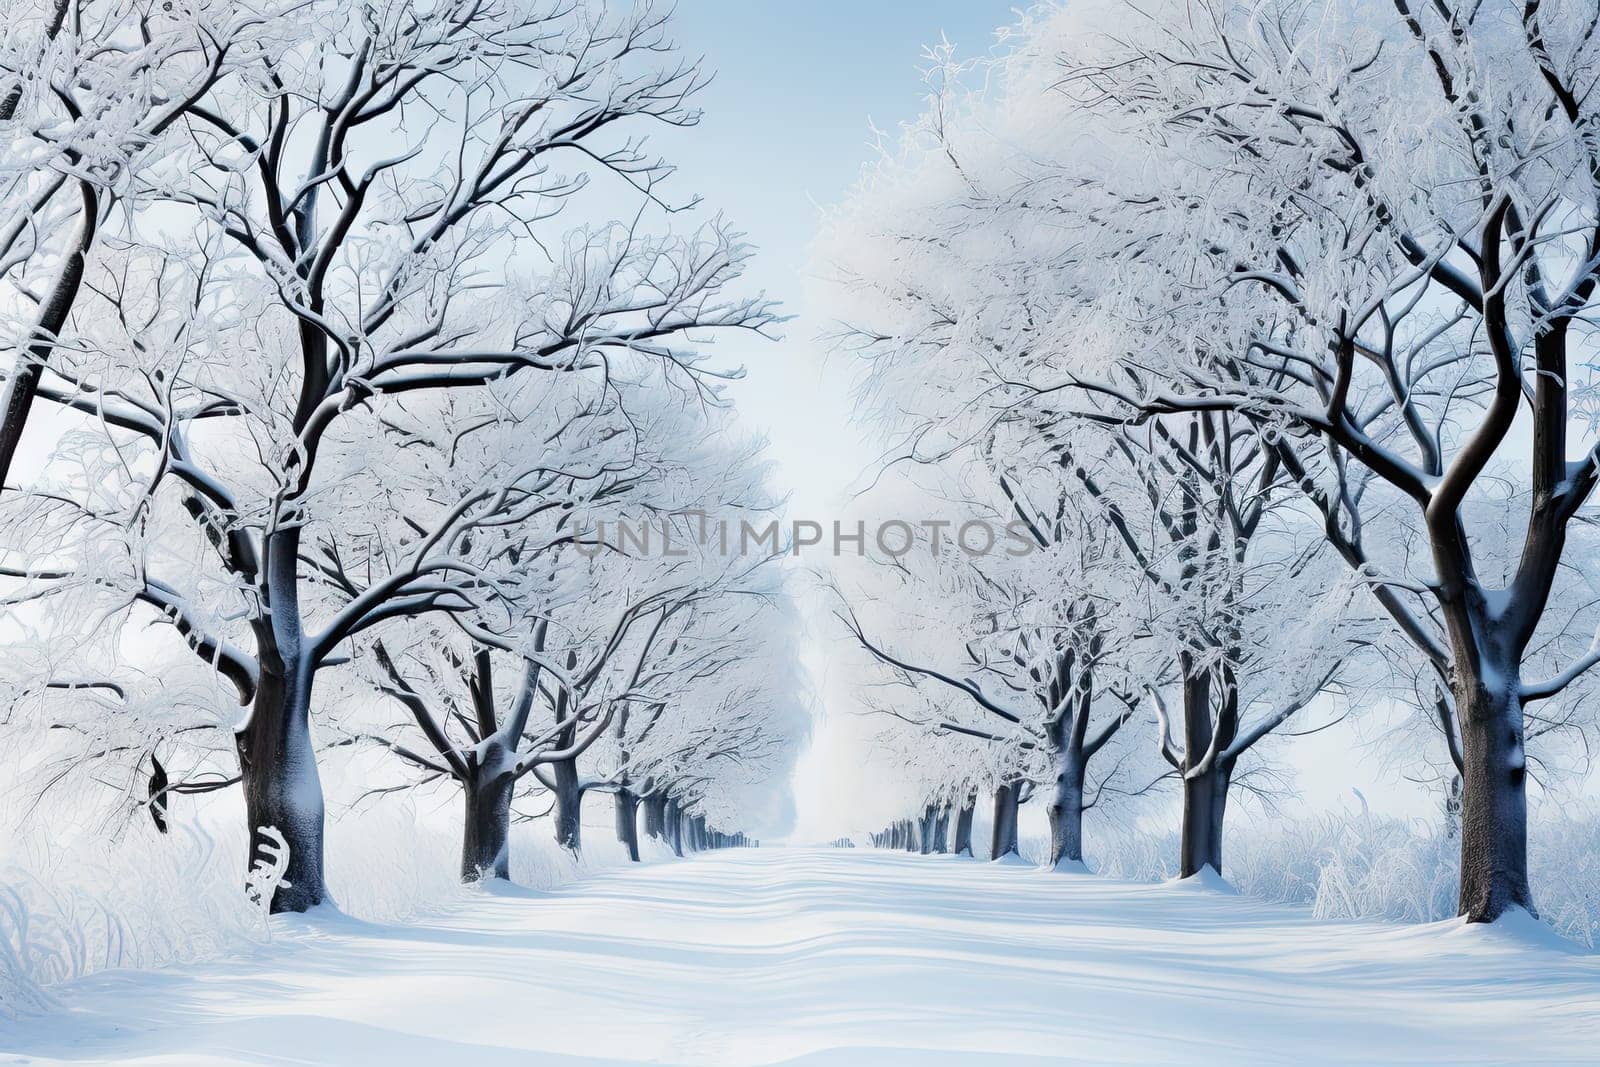 A Winter Wonderland: Serene Snowy Road Surrounded by Majestic, Snow-Covered Trees